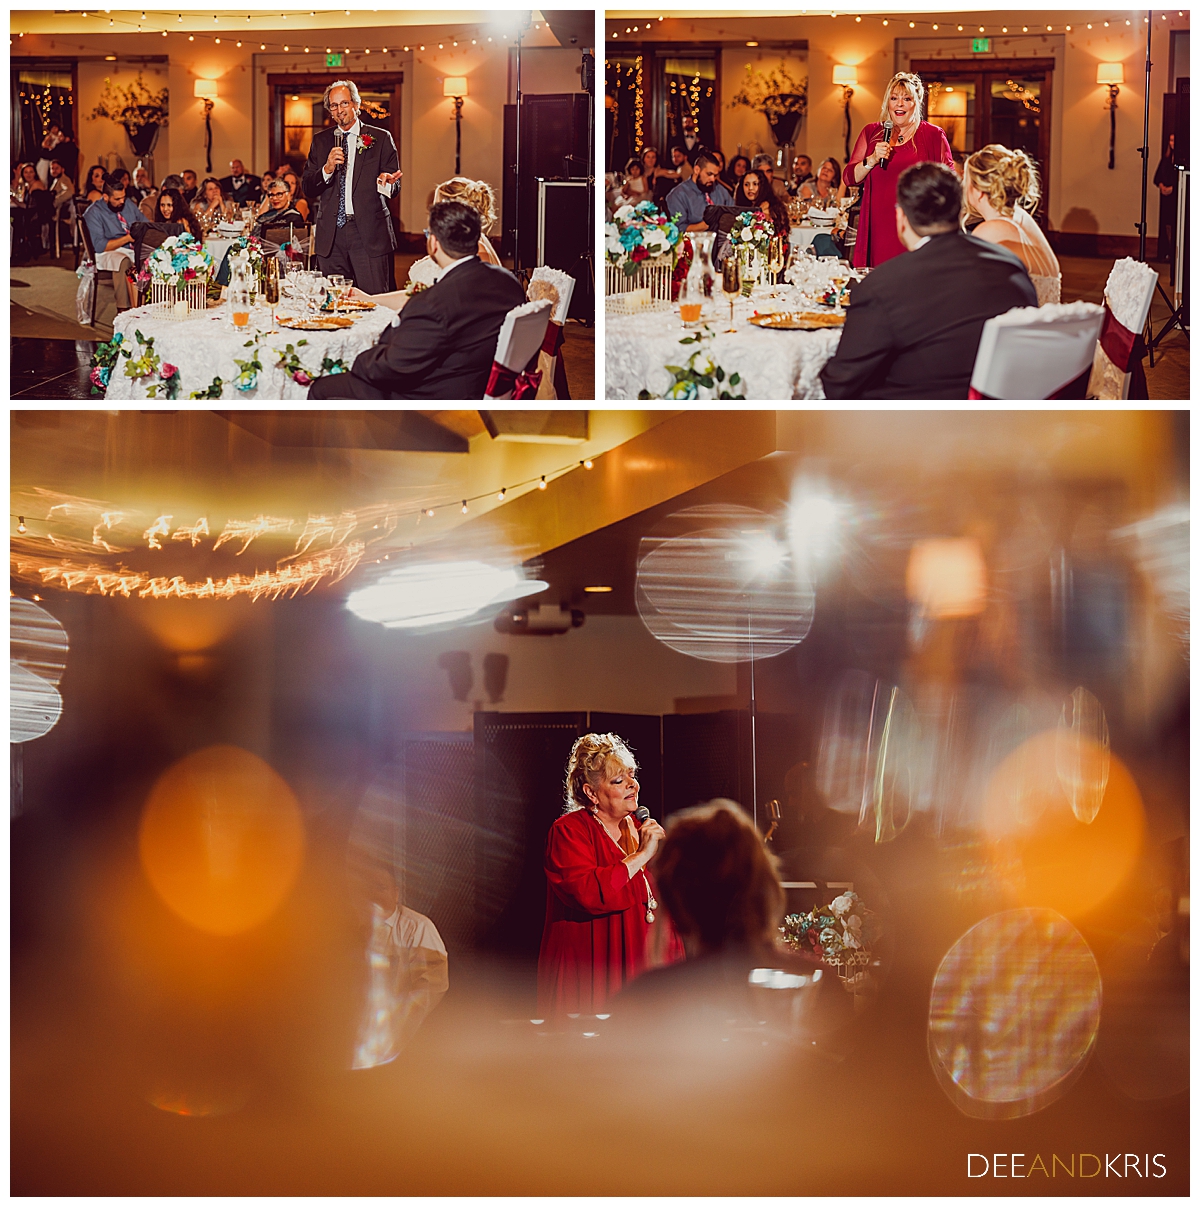 Three images: Top left image of father-of-bride giving toast. Top right image of mother-of-bride giving toast. Bottom image of mother-of-bride singing to couple.